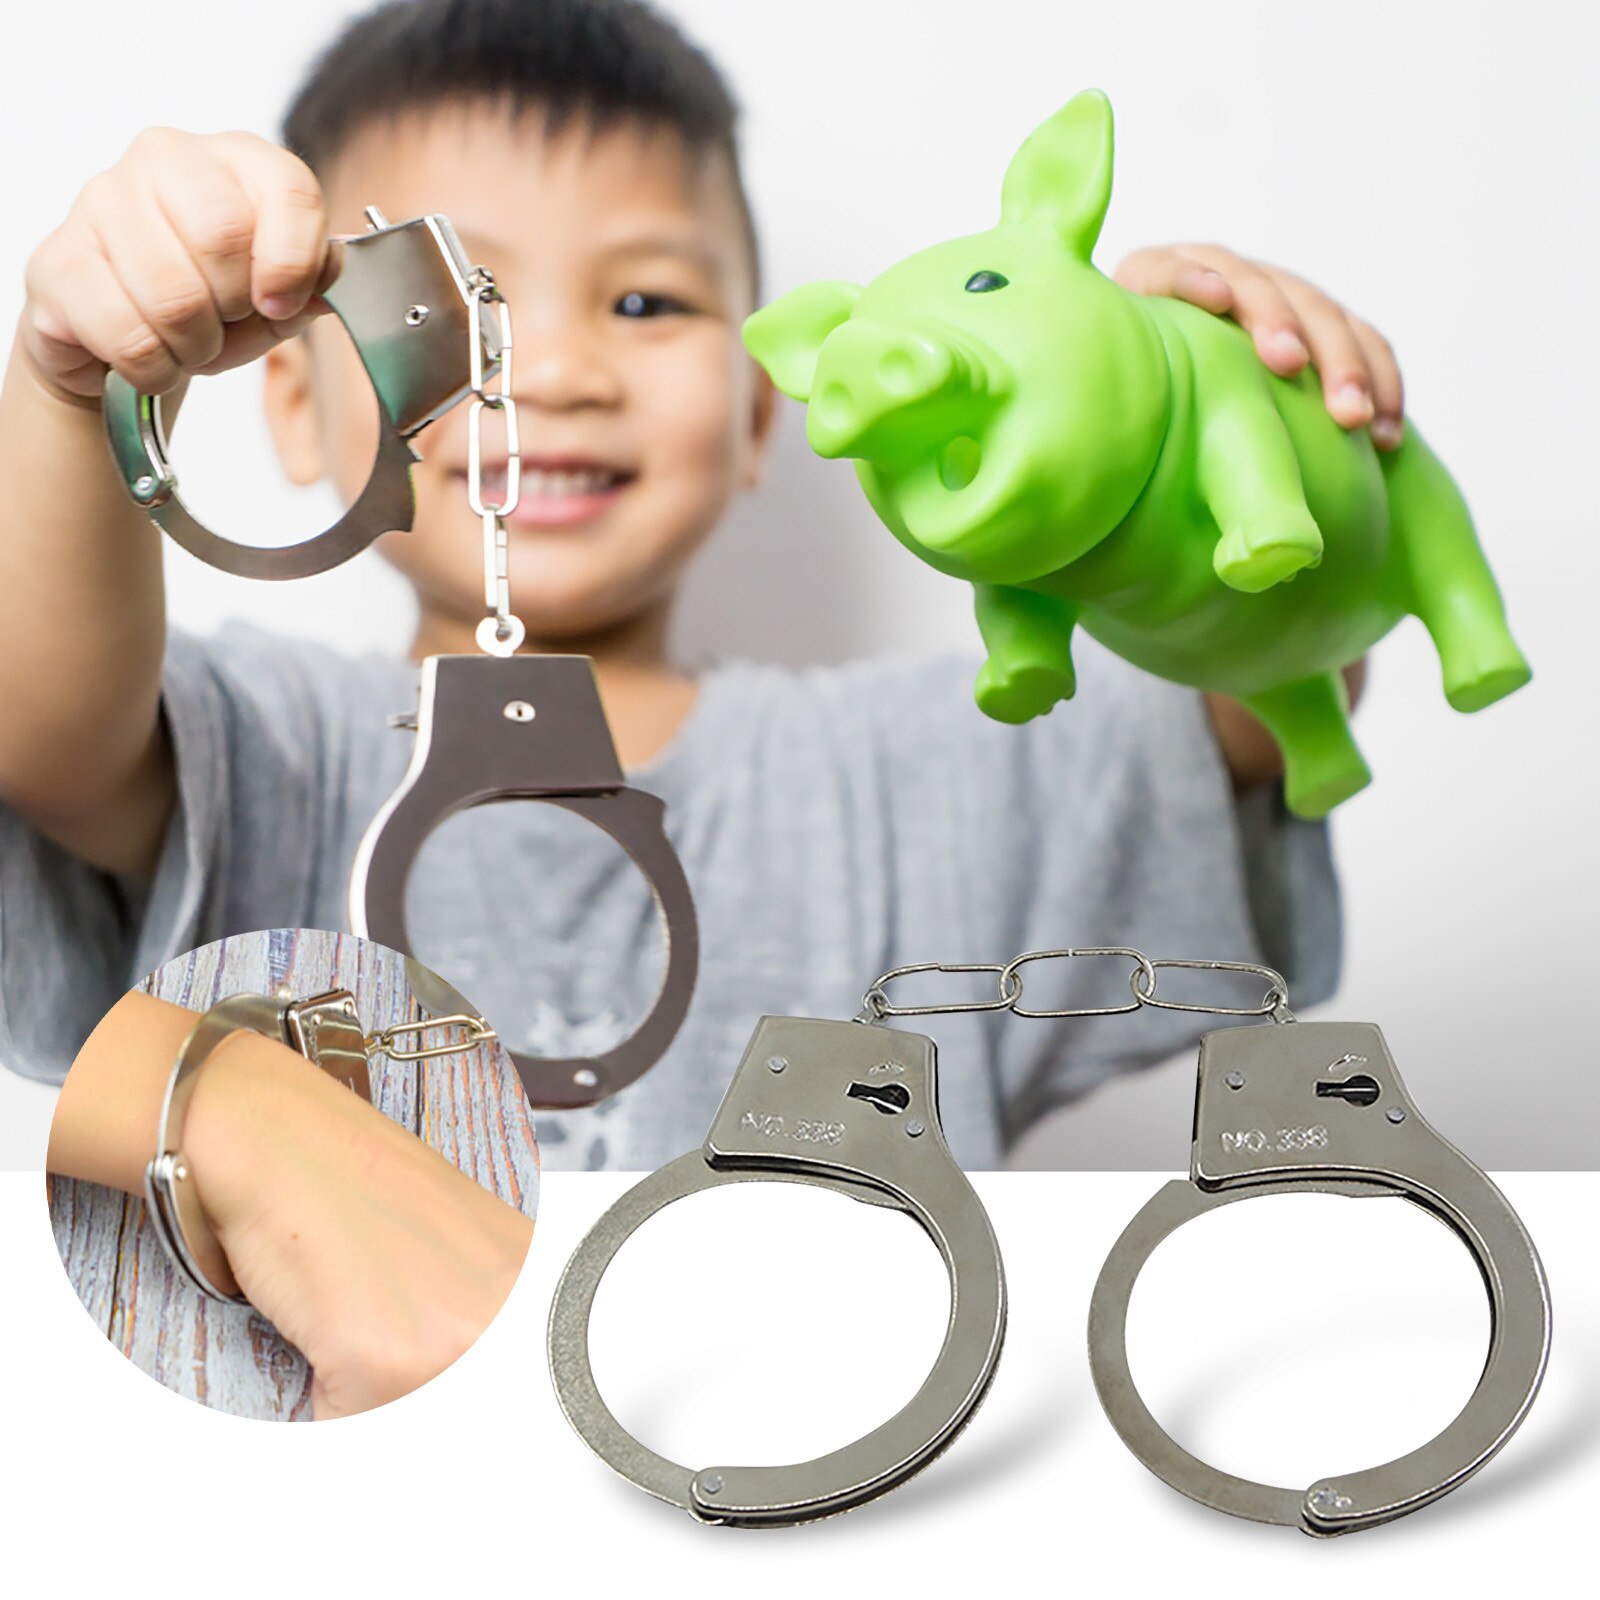 Tricky Handcuffs Toy Magic Props C..